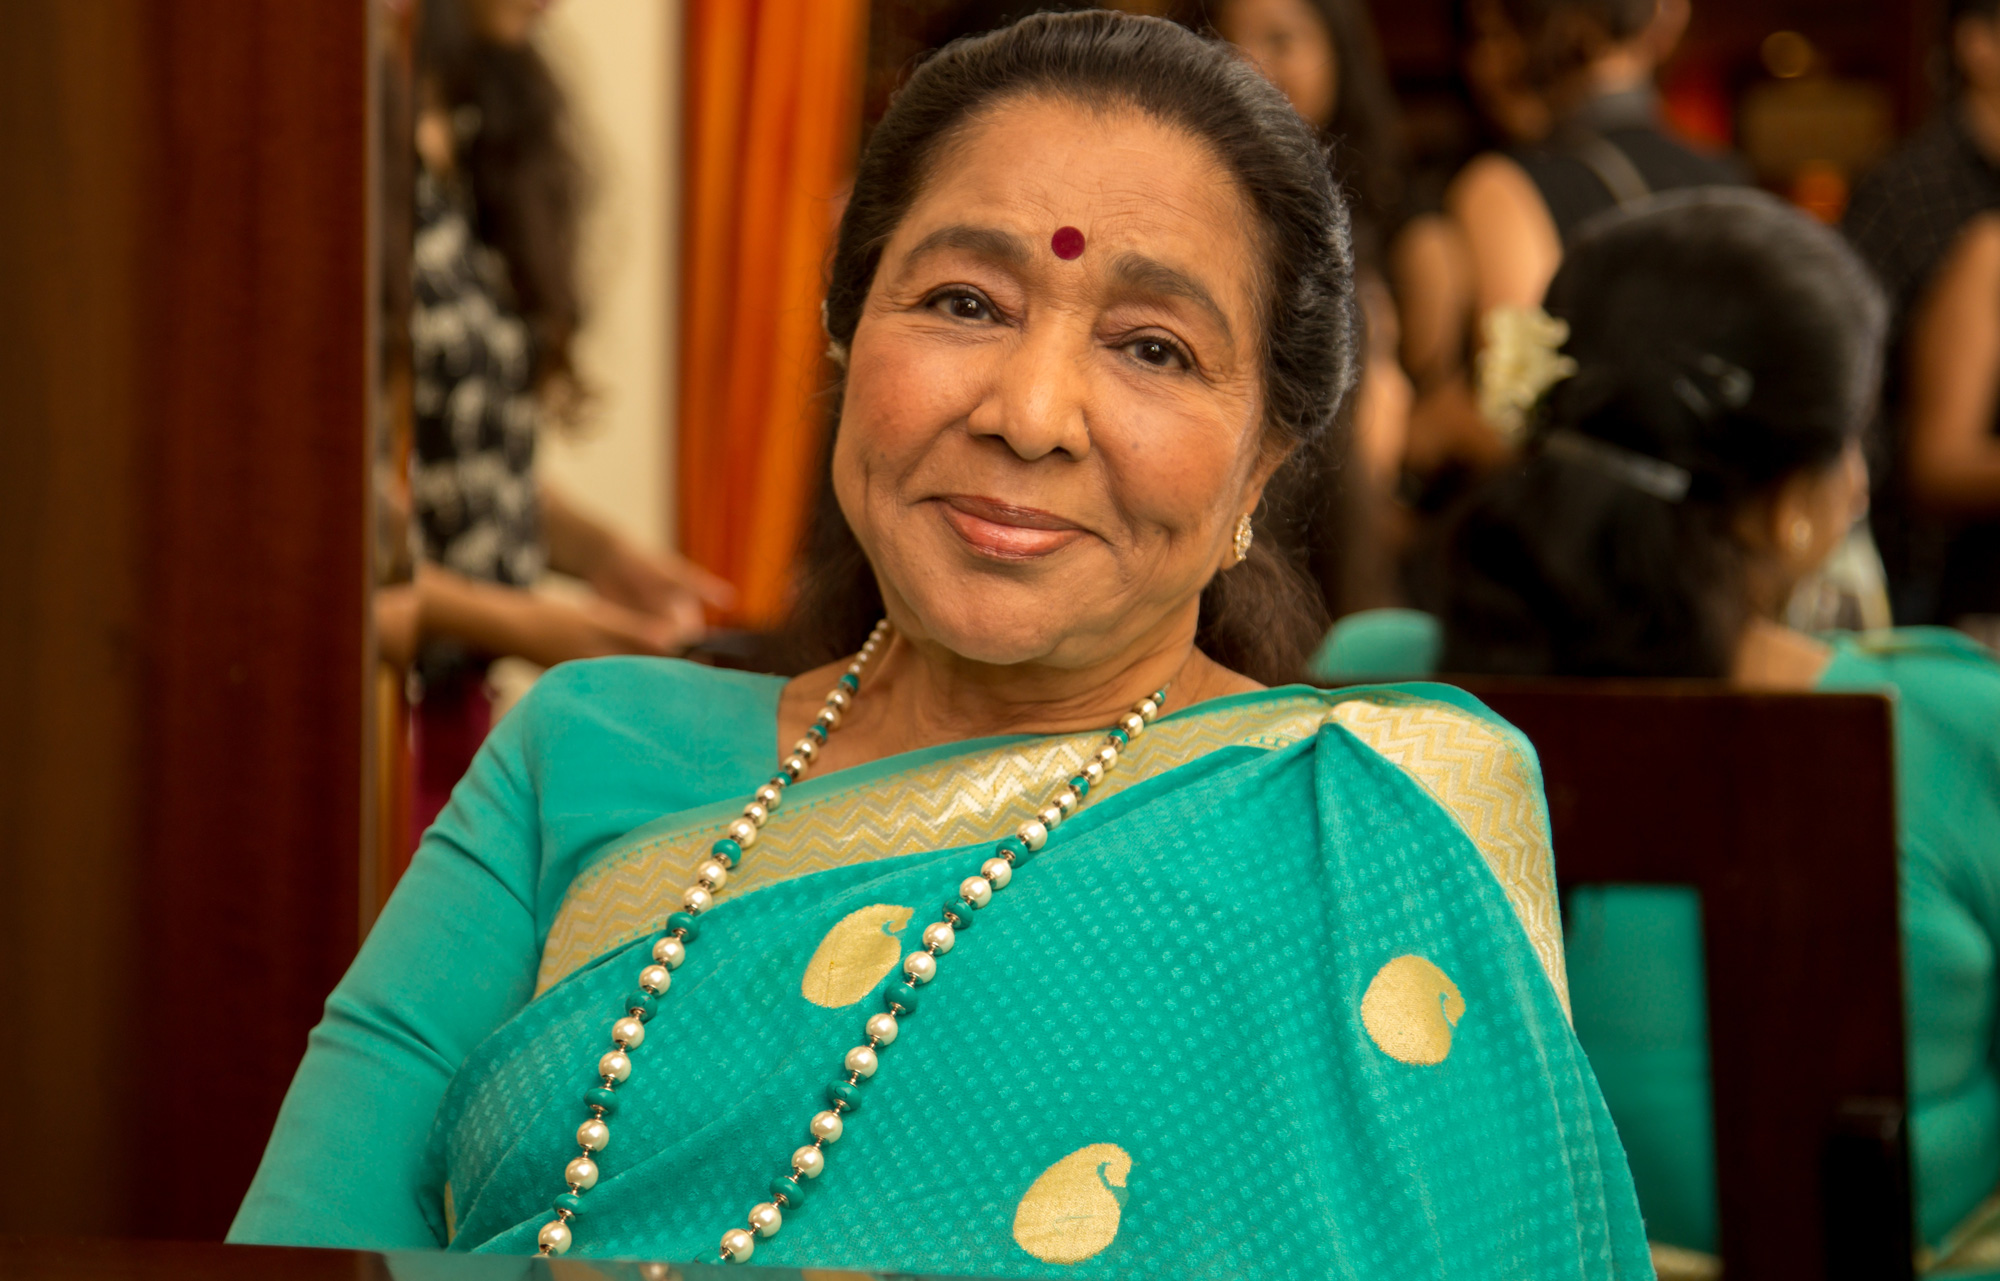 Singer Asha Bhosle recently shared a picture on social media of herself with other people whom were all busy on their phones, and remarked, 